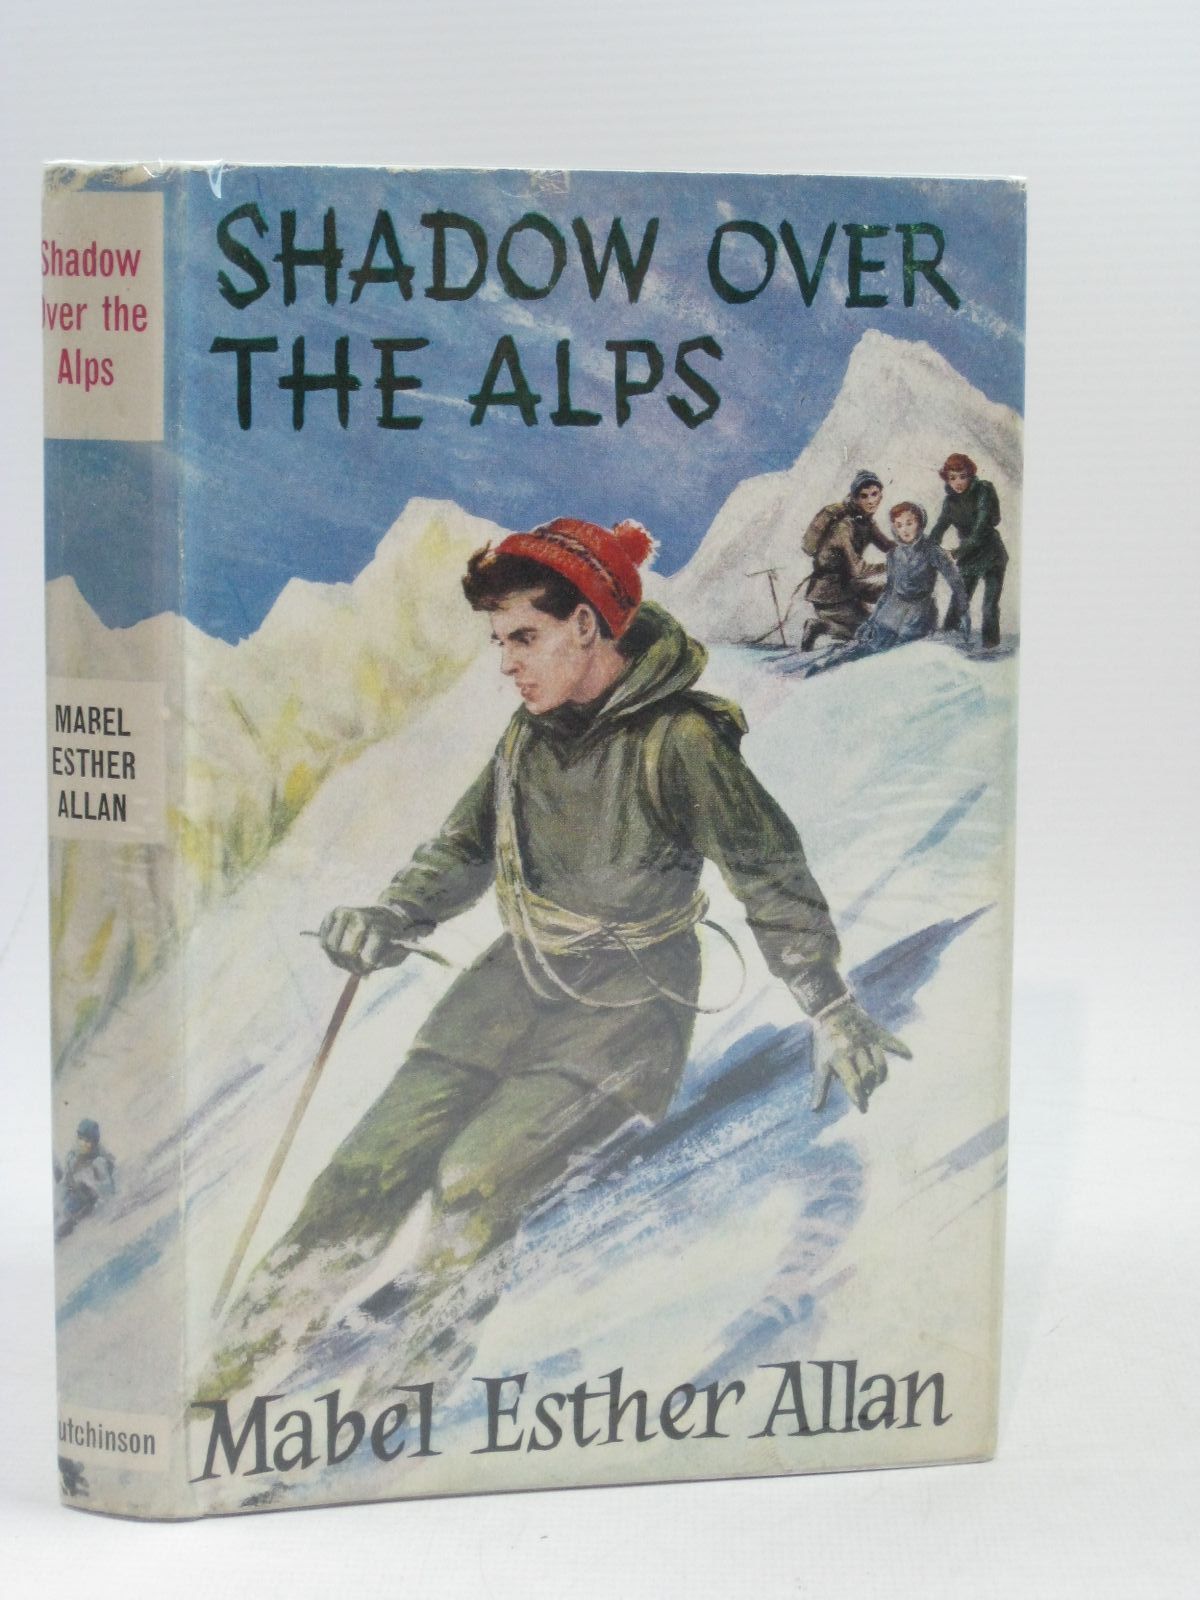 Cover of SHADOW OVER THE ALPS by Mabel Esther Allan